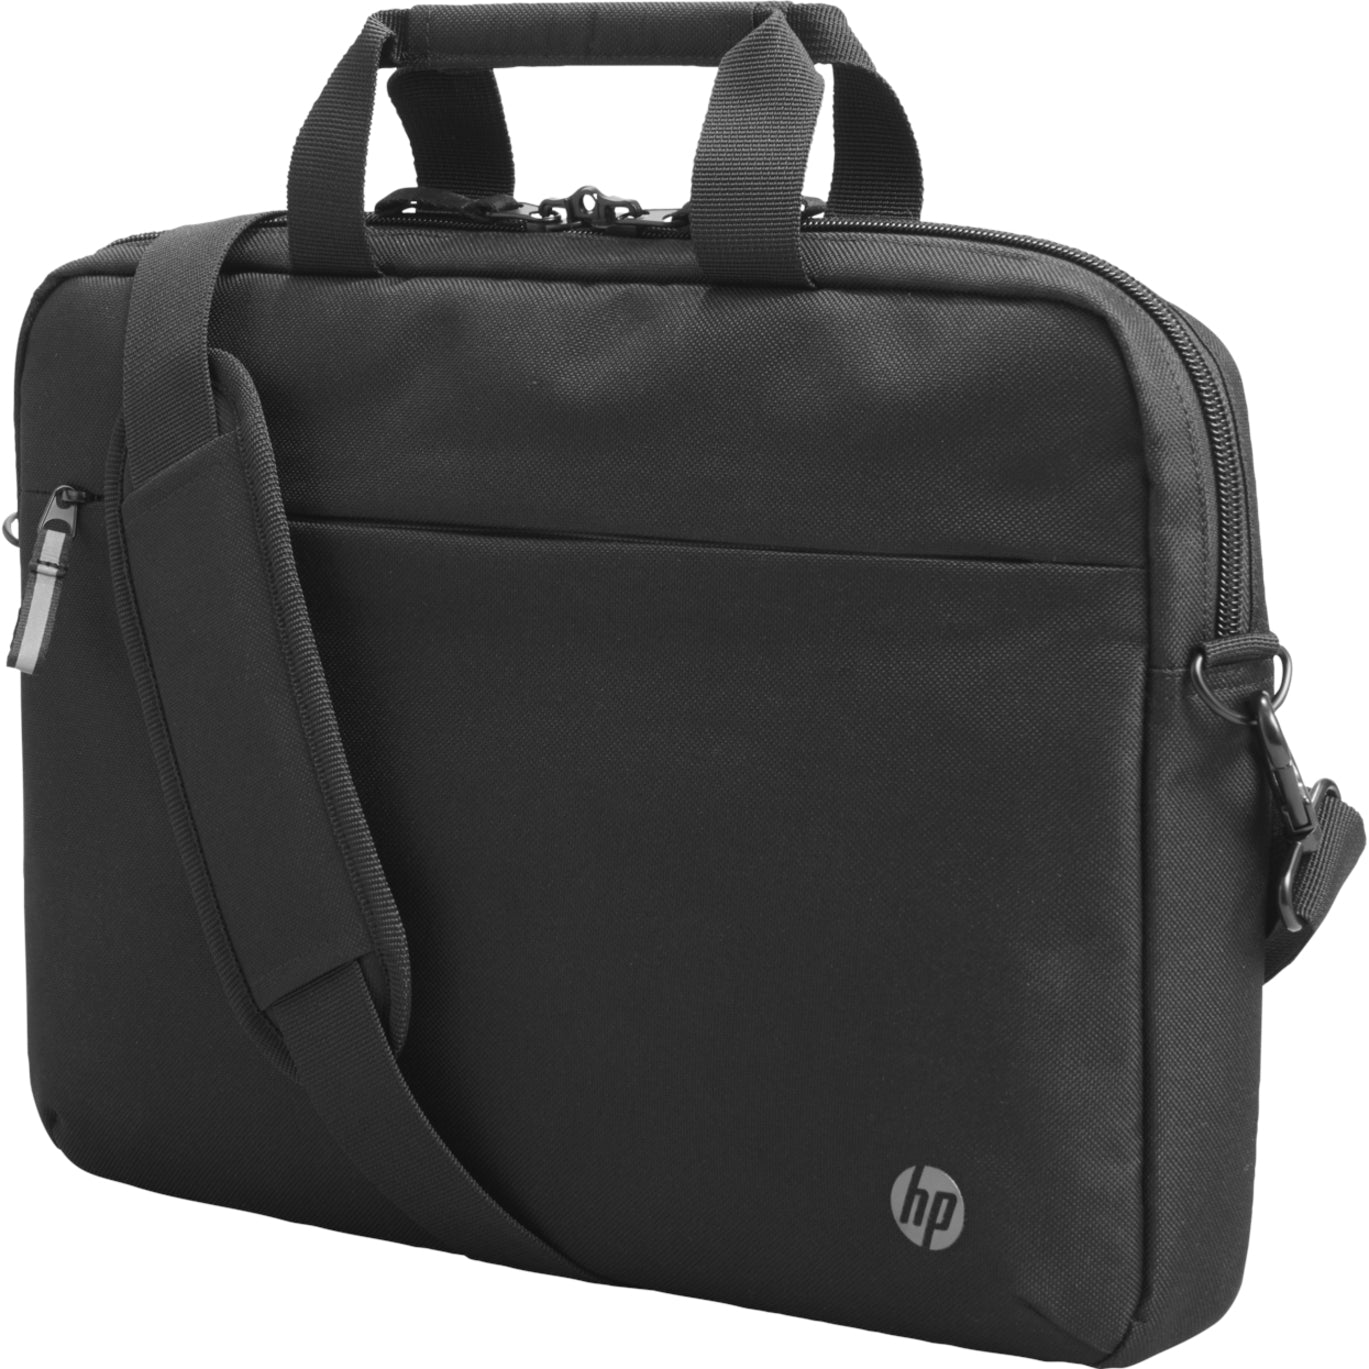 HP 3E5F9AA Renew Business 14.1 Laptop Bag, Recycled, 100% Plastic, Lightweight Carrying Case